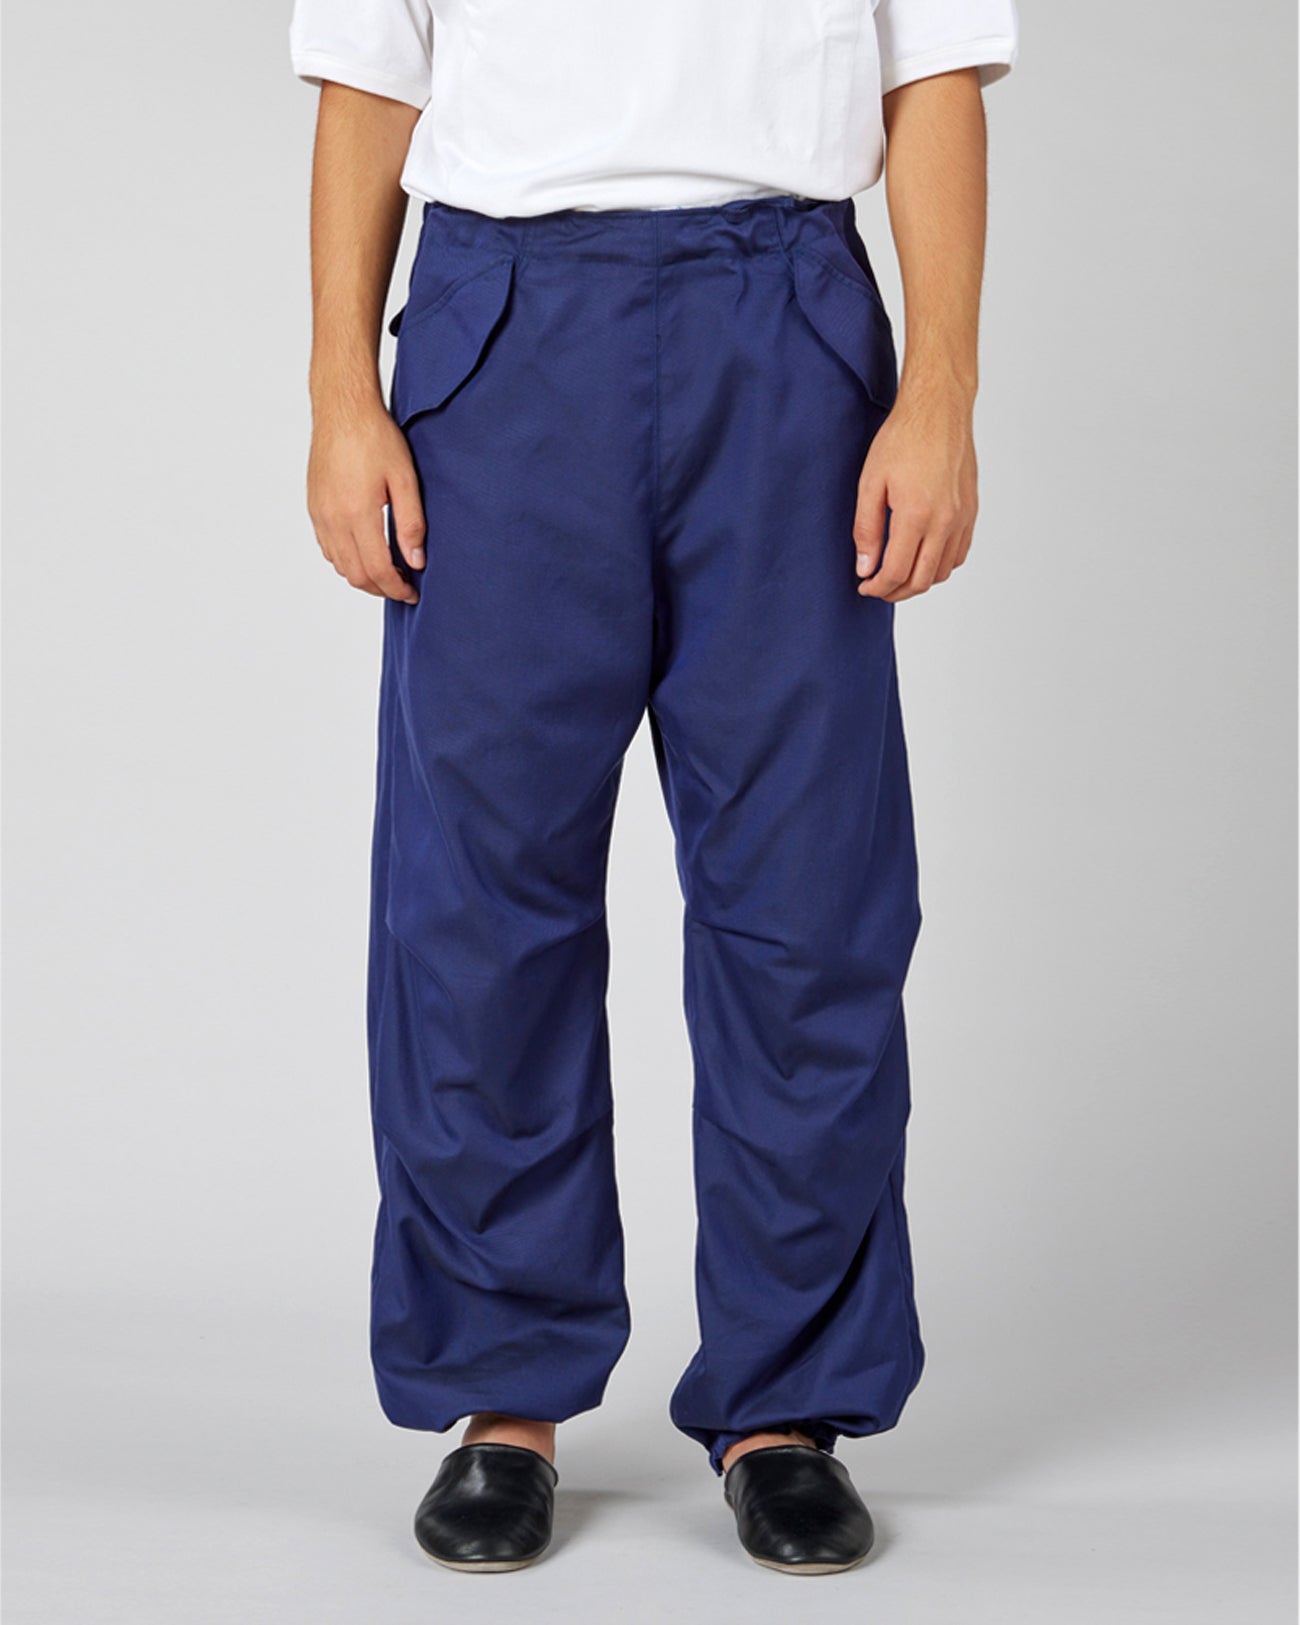 Finx OX New M65 Trousers - navy - FAB4 ONLINE STORE